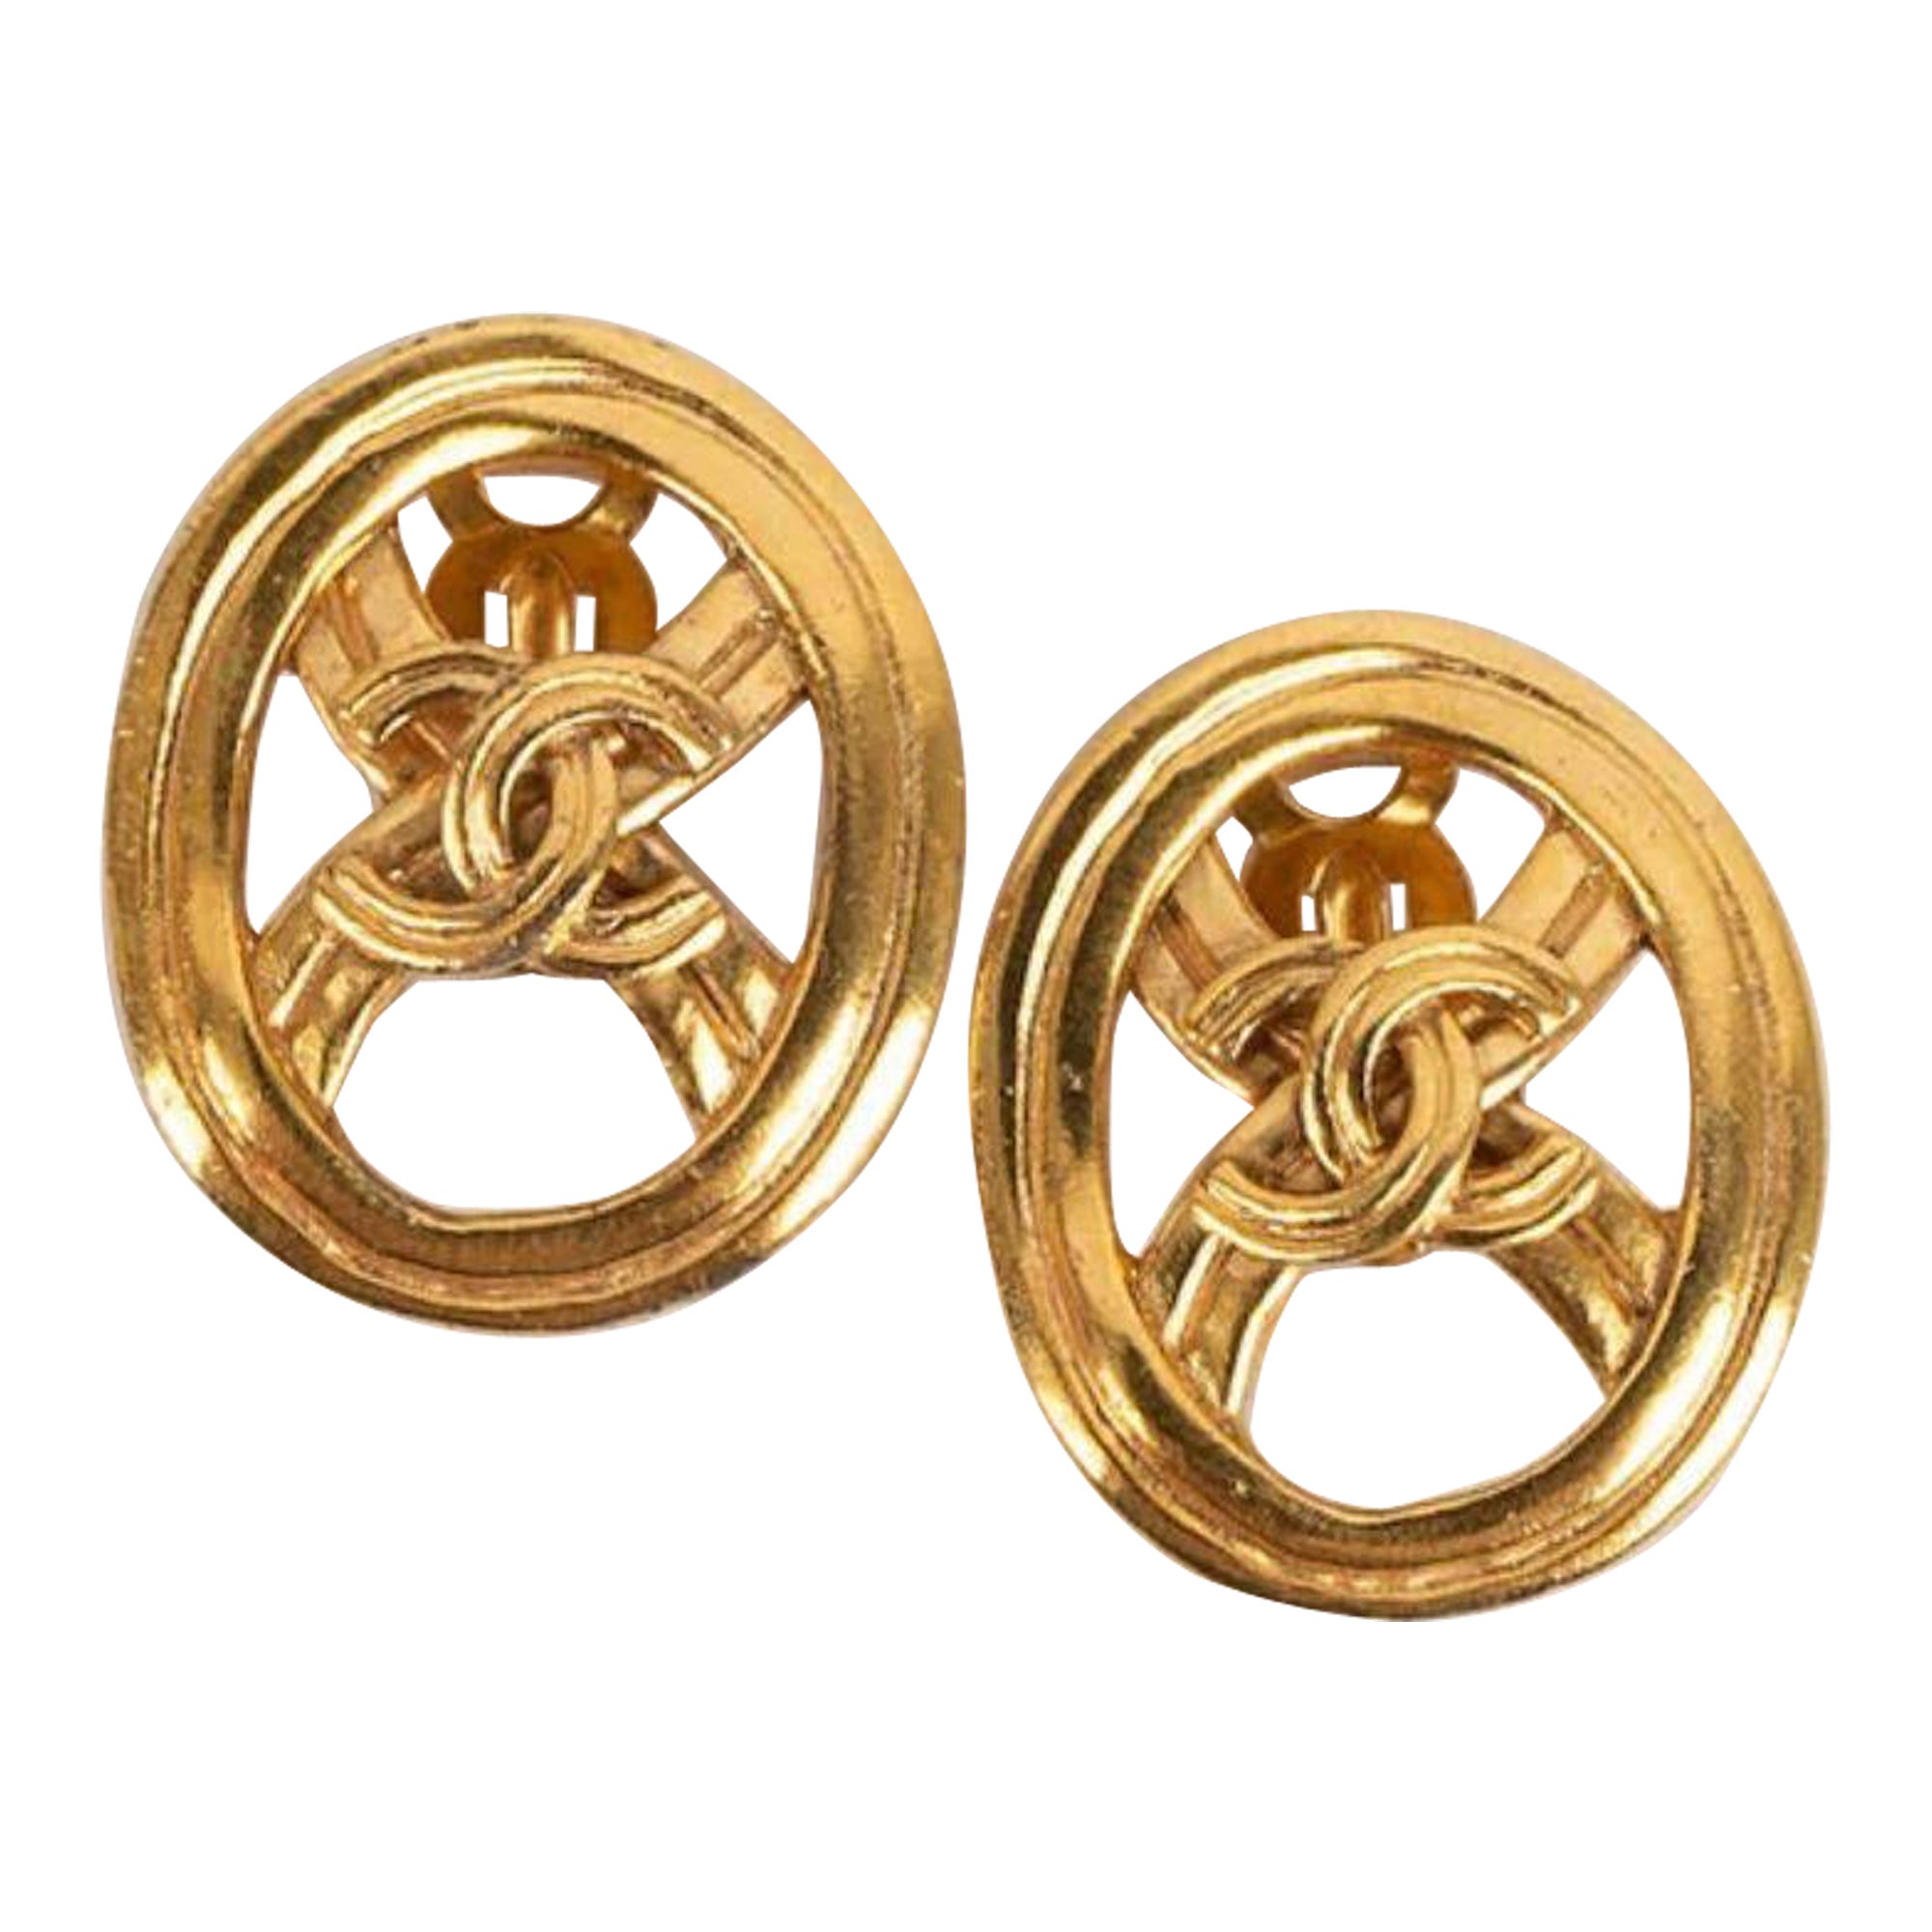 Chanel Ohrring Clips in Gold Metall, 1996 im Angebot